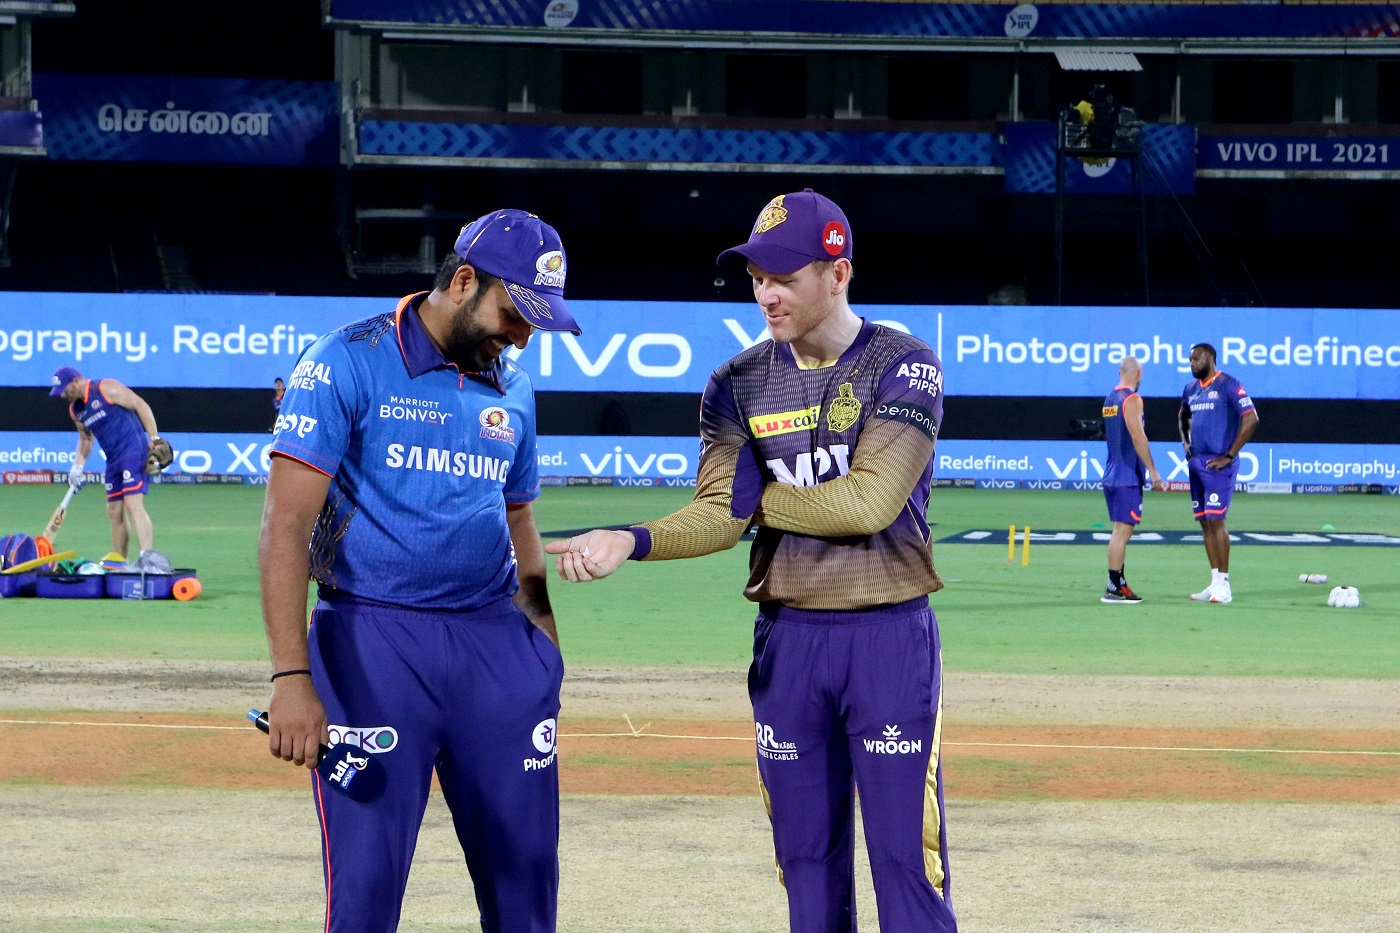 IPL 2021 Today’s Match, MI vs KKR: Live Cricket Streaming, Match Timings, Playing 11, and Where & How to Watch